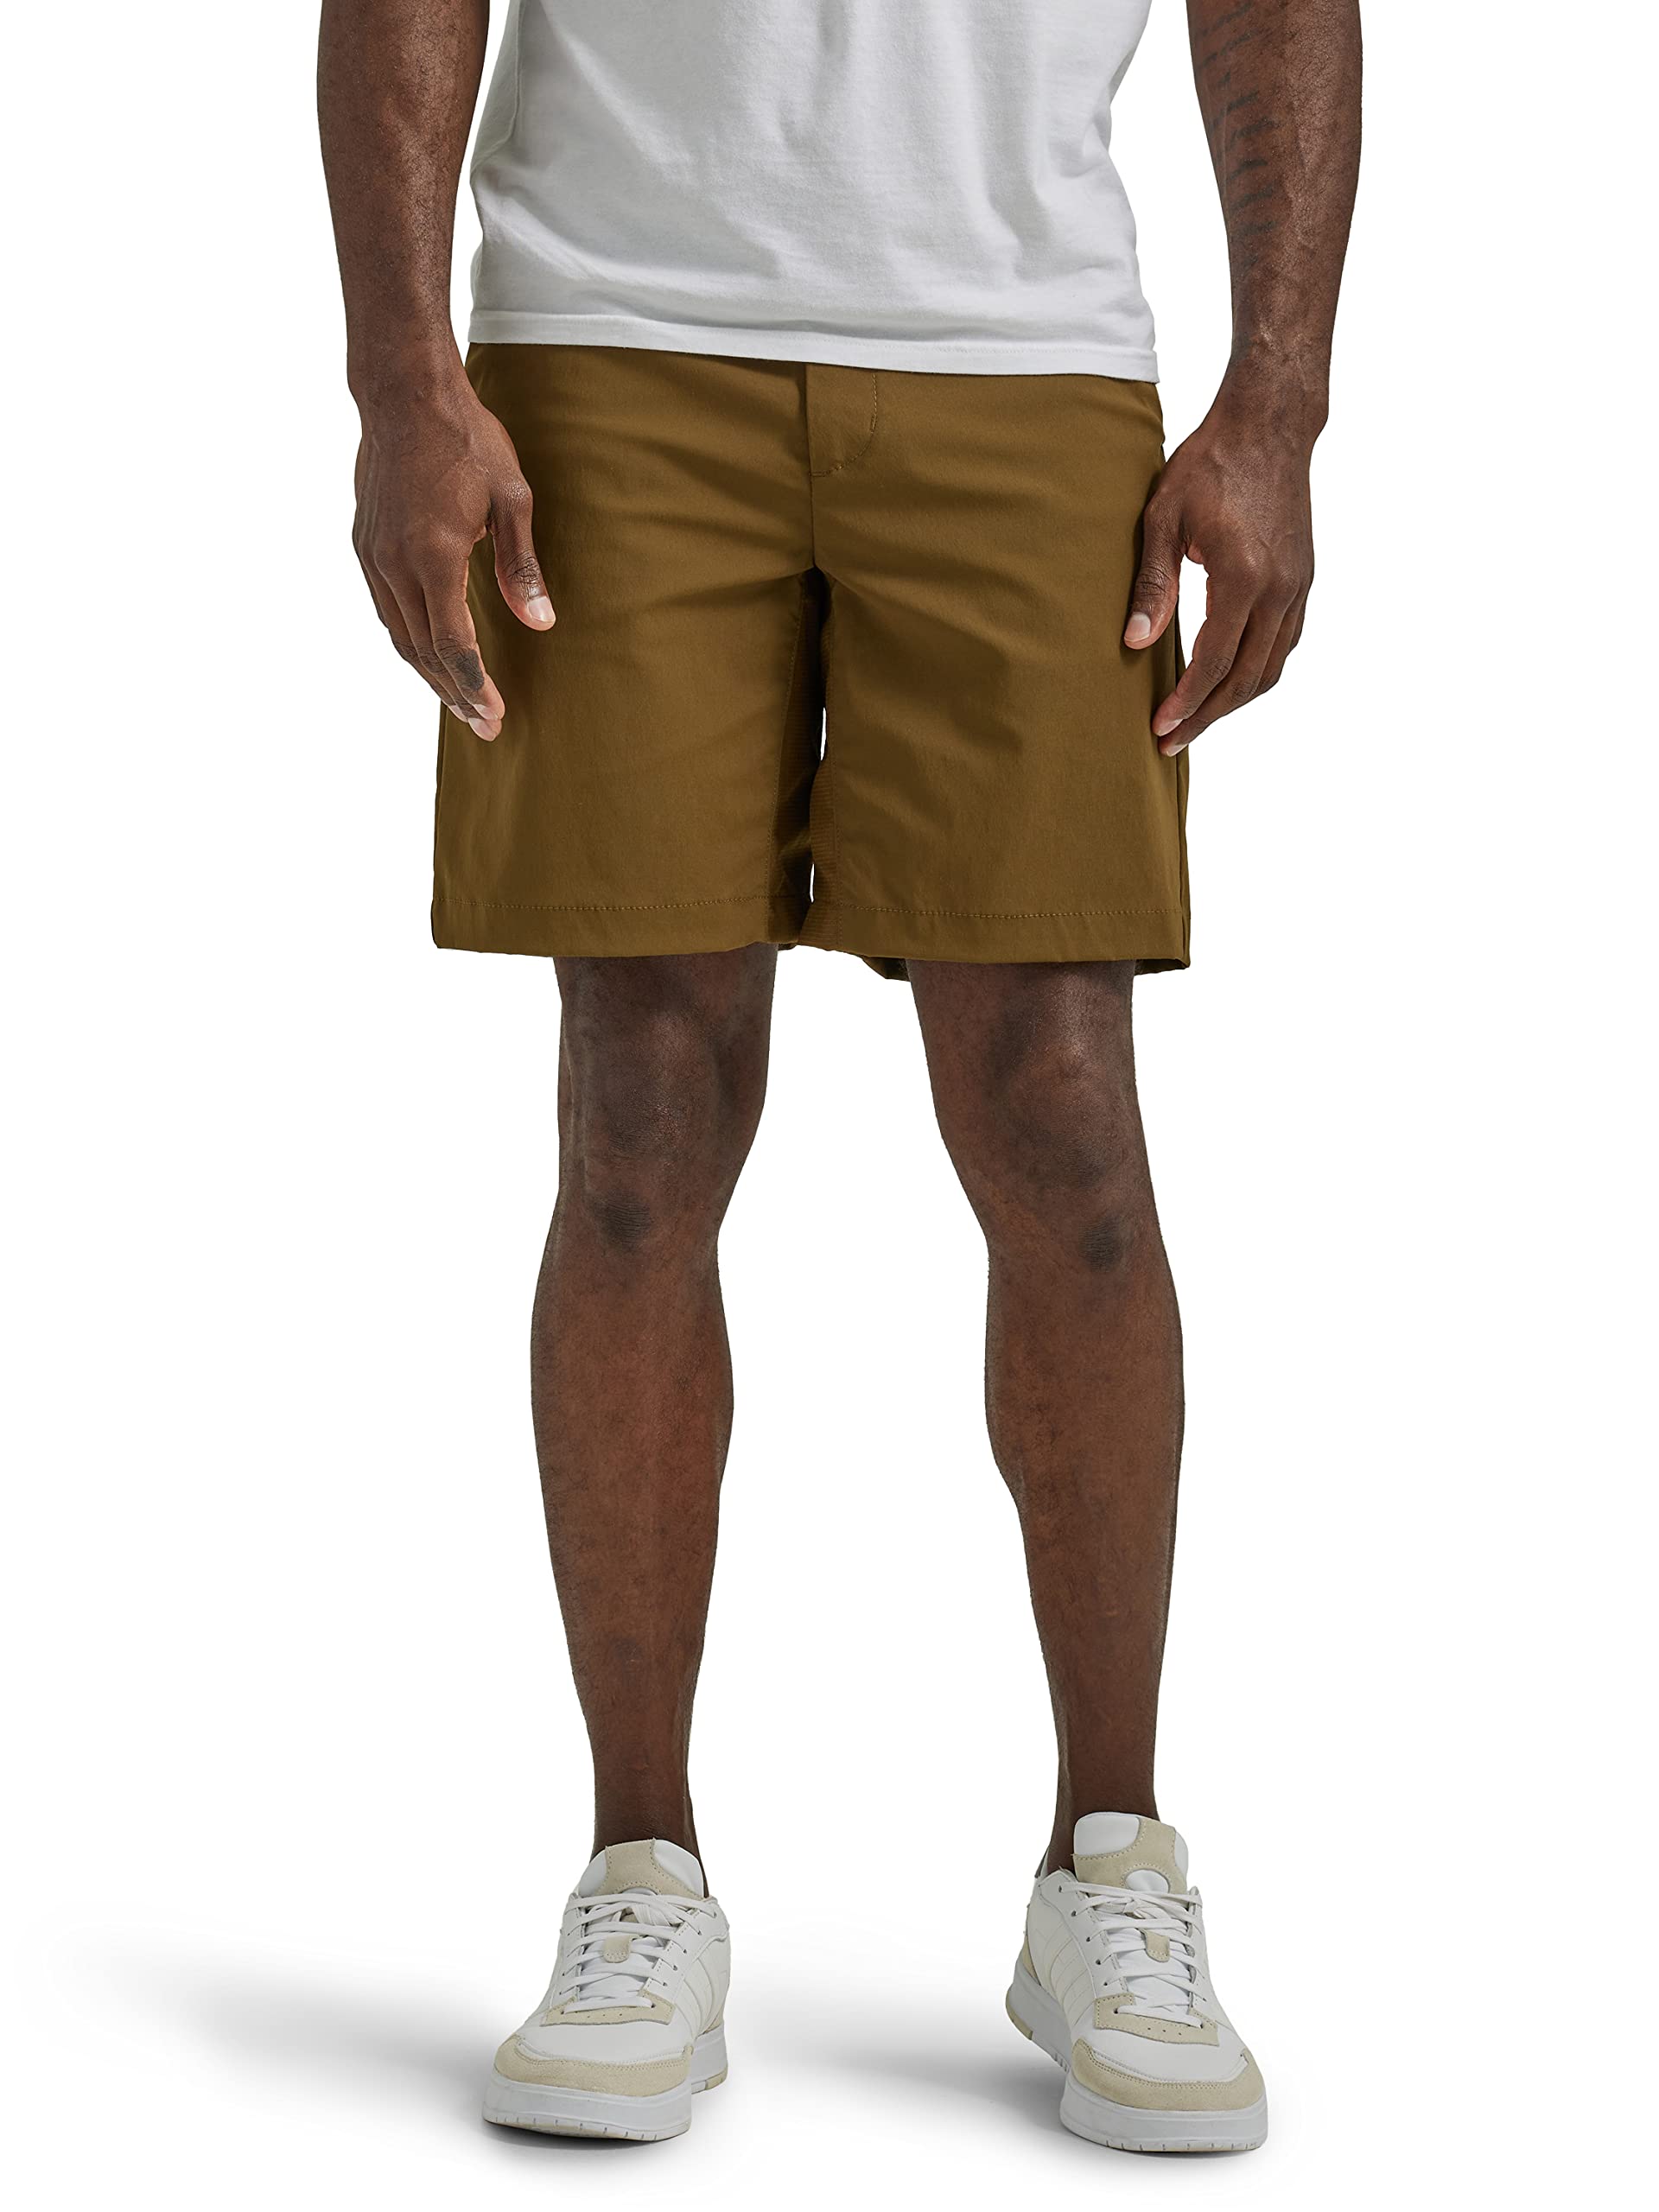 Lee Men's Extreme Motion Regular Fit Synthetic Flat Front Short (Jurassic) 2 for $24.74, 1 for $16.49 + Free Shipping w/ Prime or on $35+